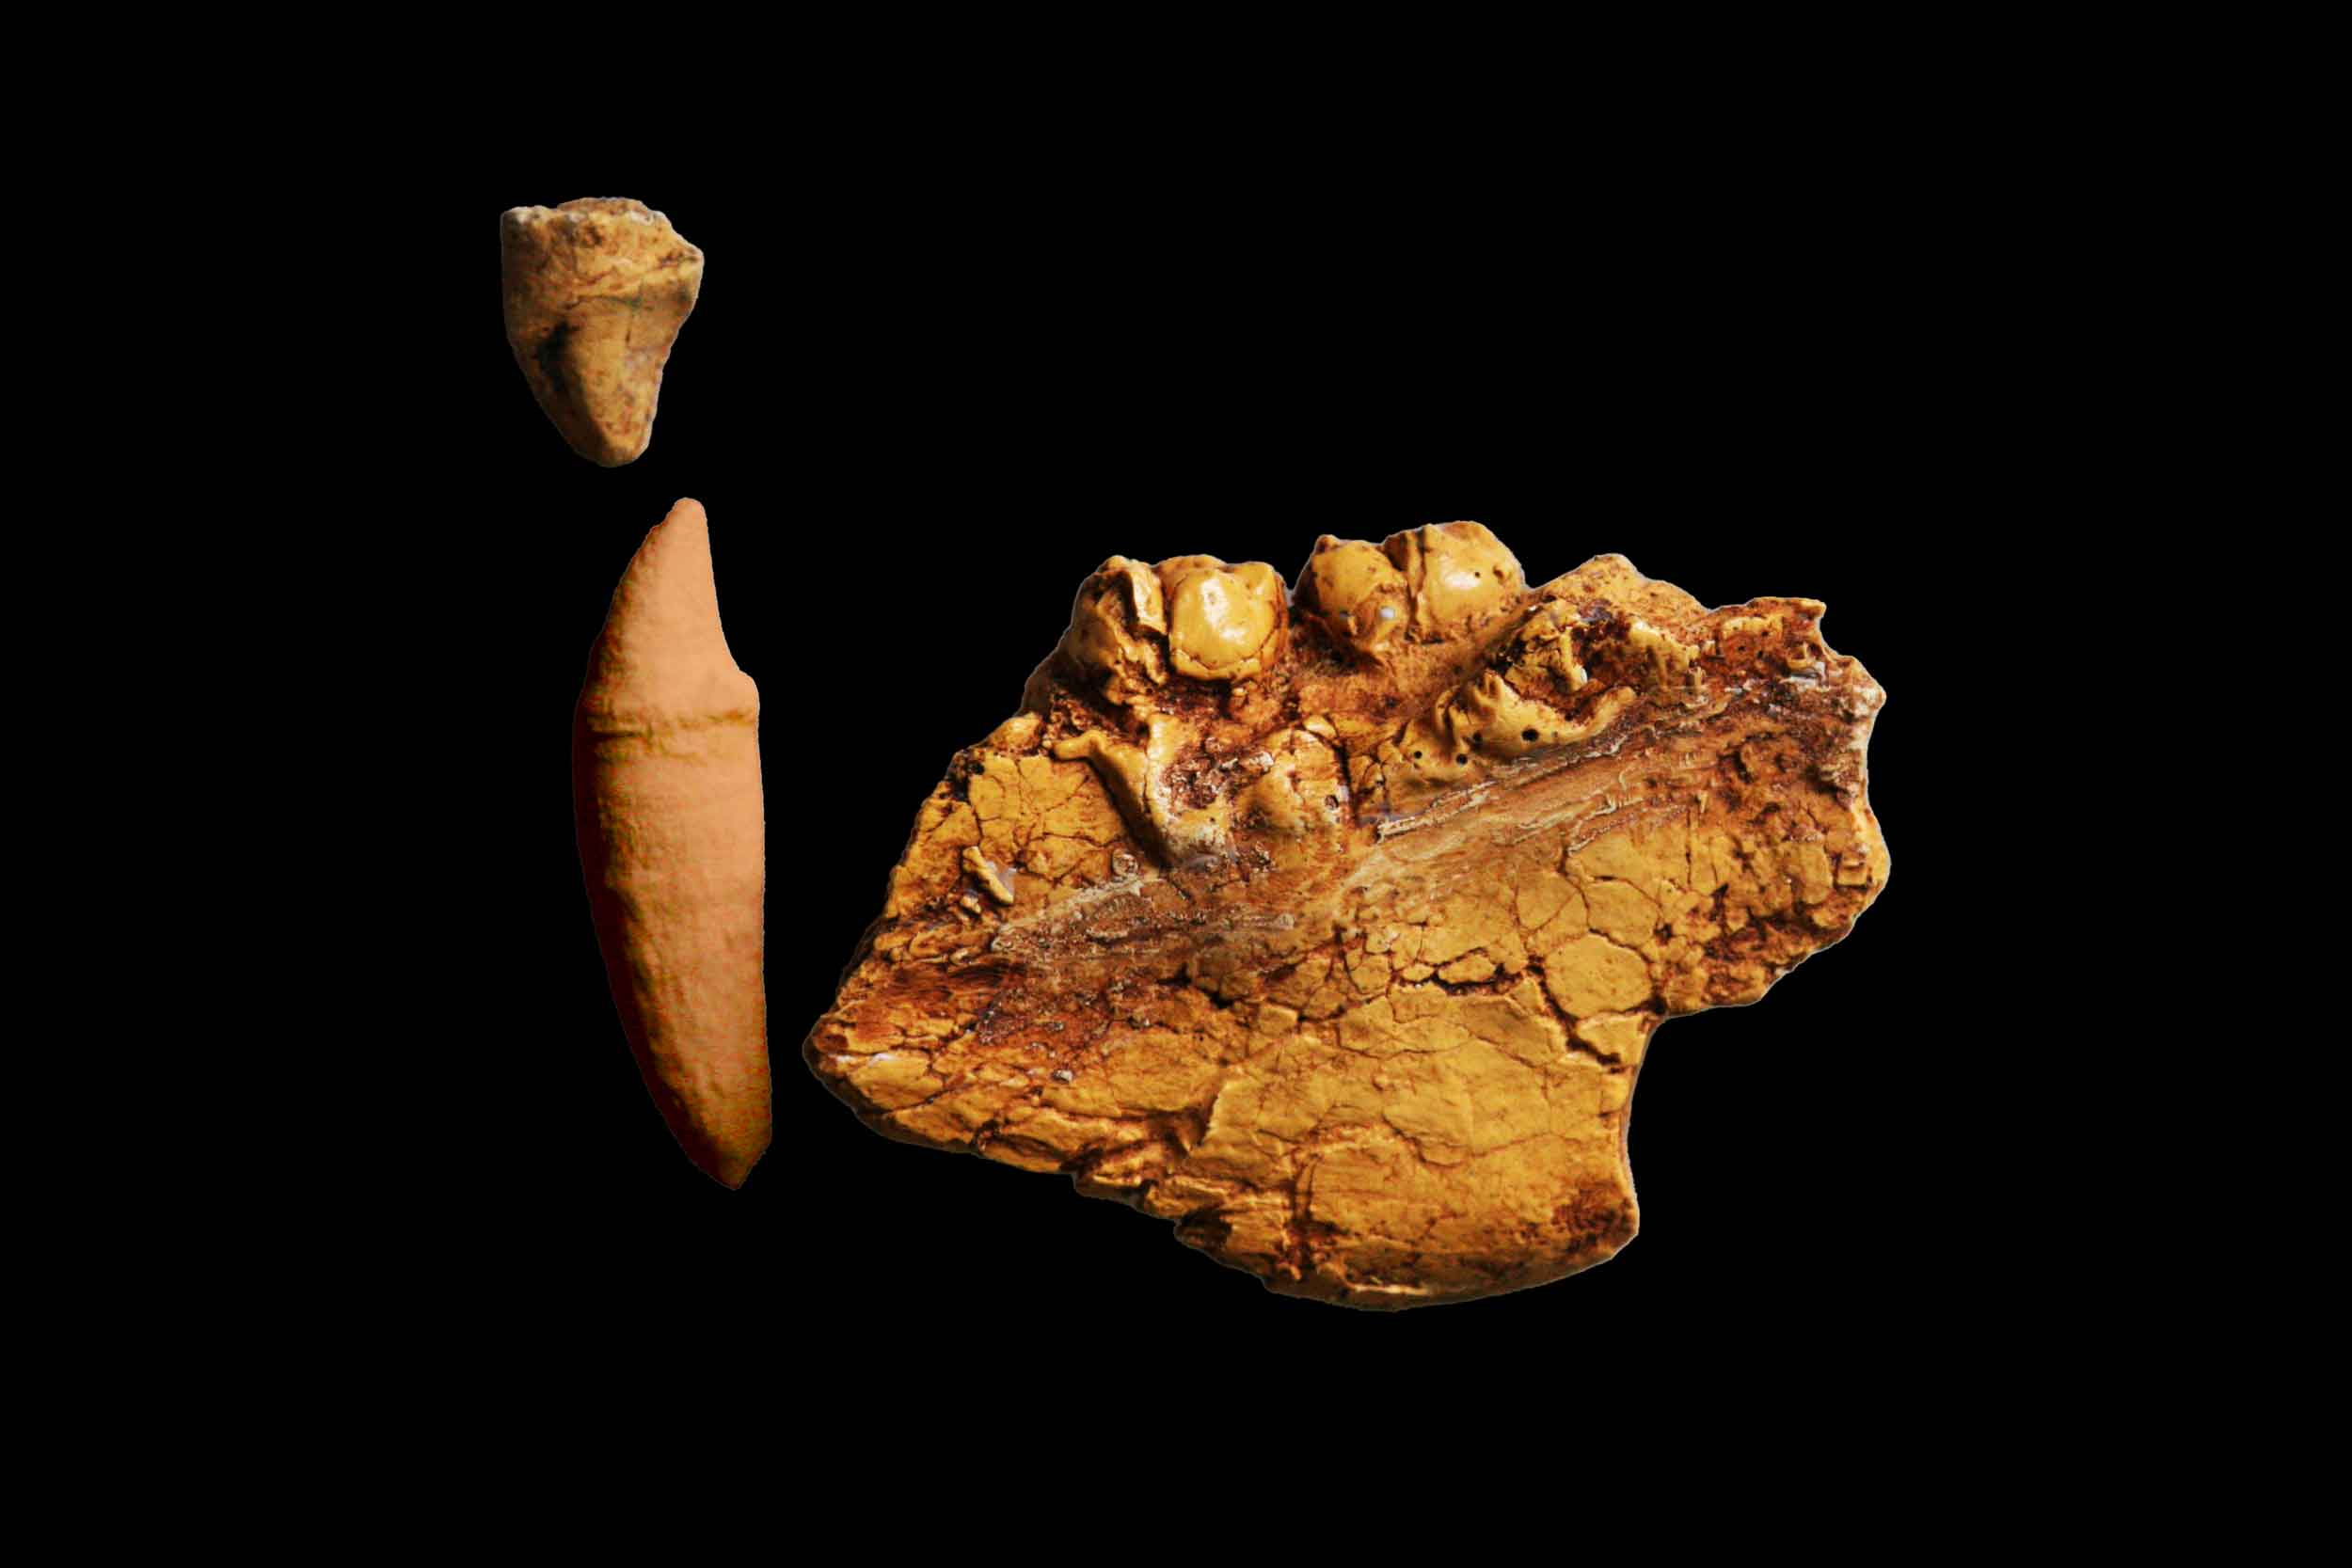 An upper and lower canine together with a fragment of mandible with two molar teeth visible